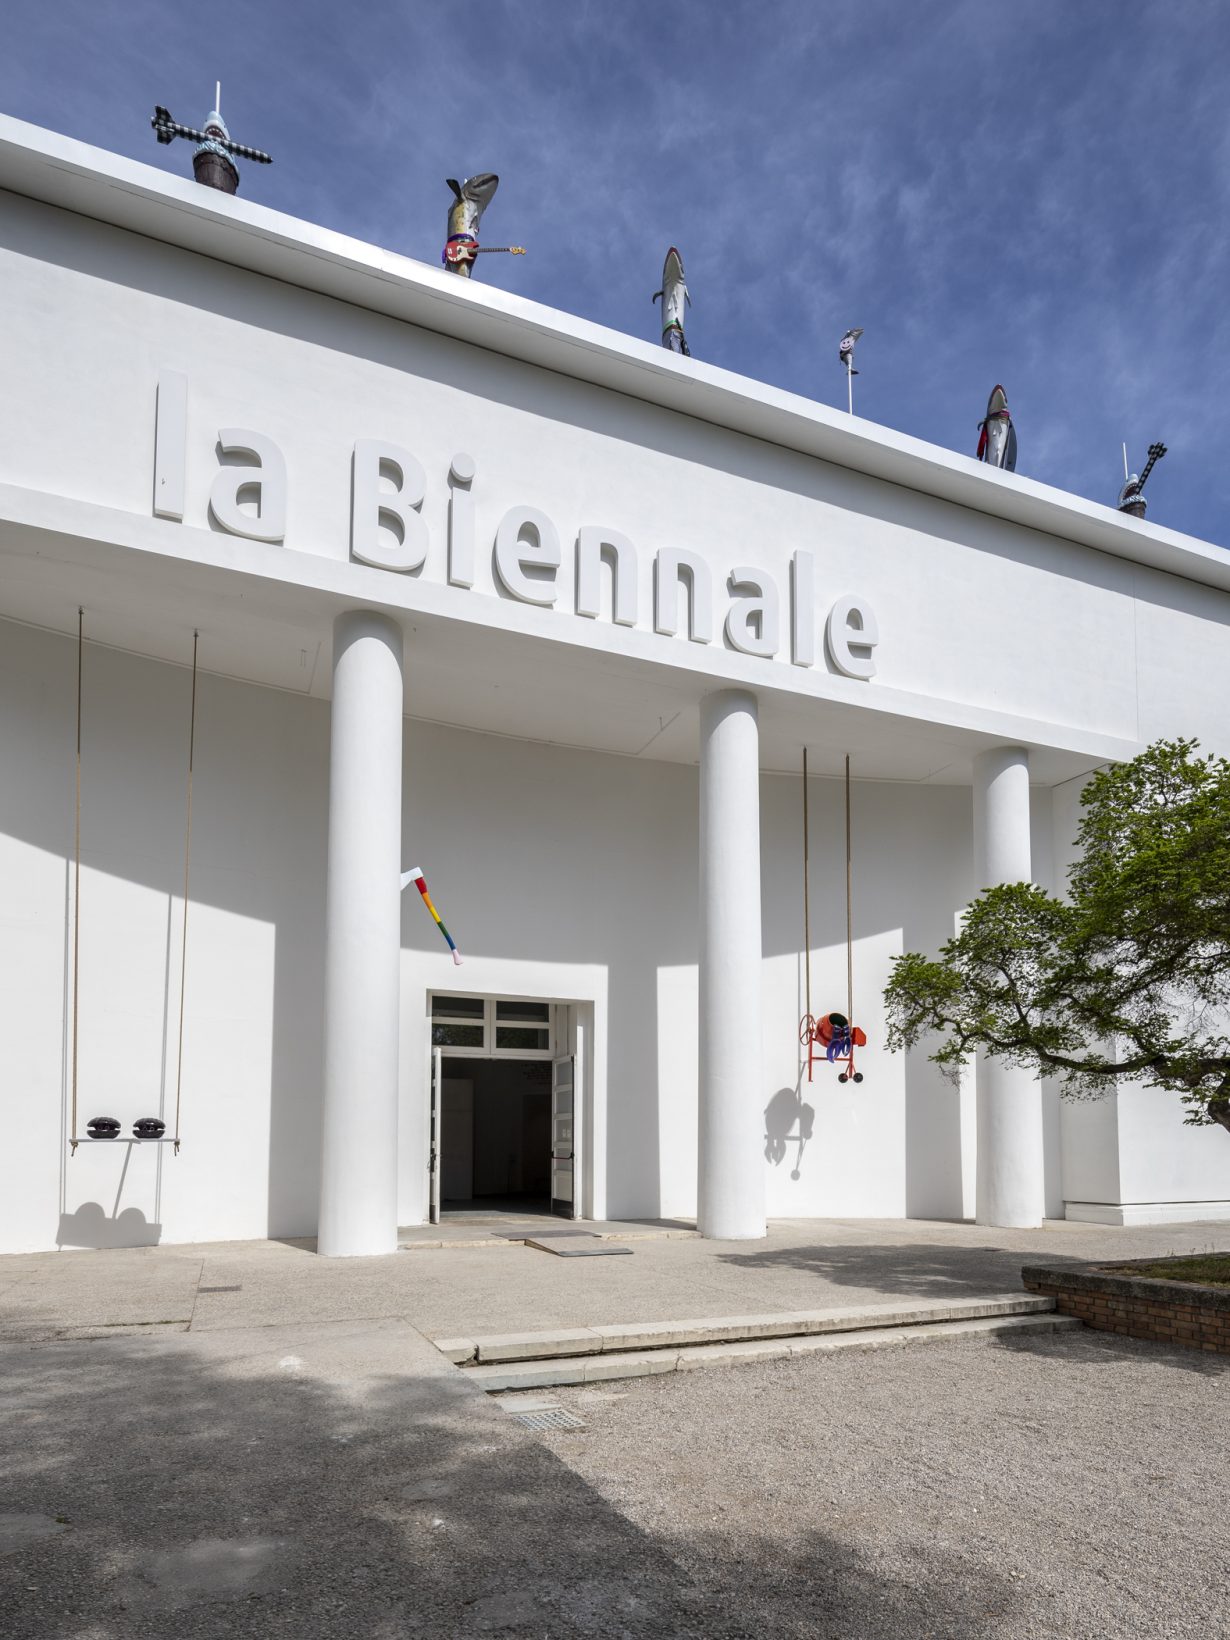 What's It Like To Be a Biennale? - ArtReview